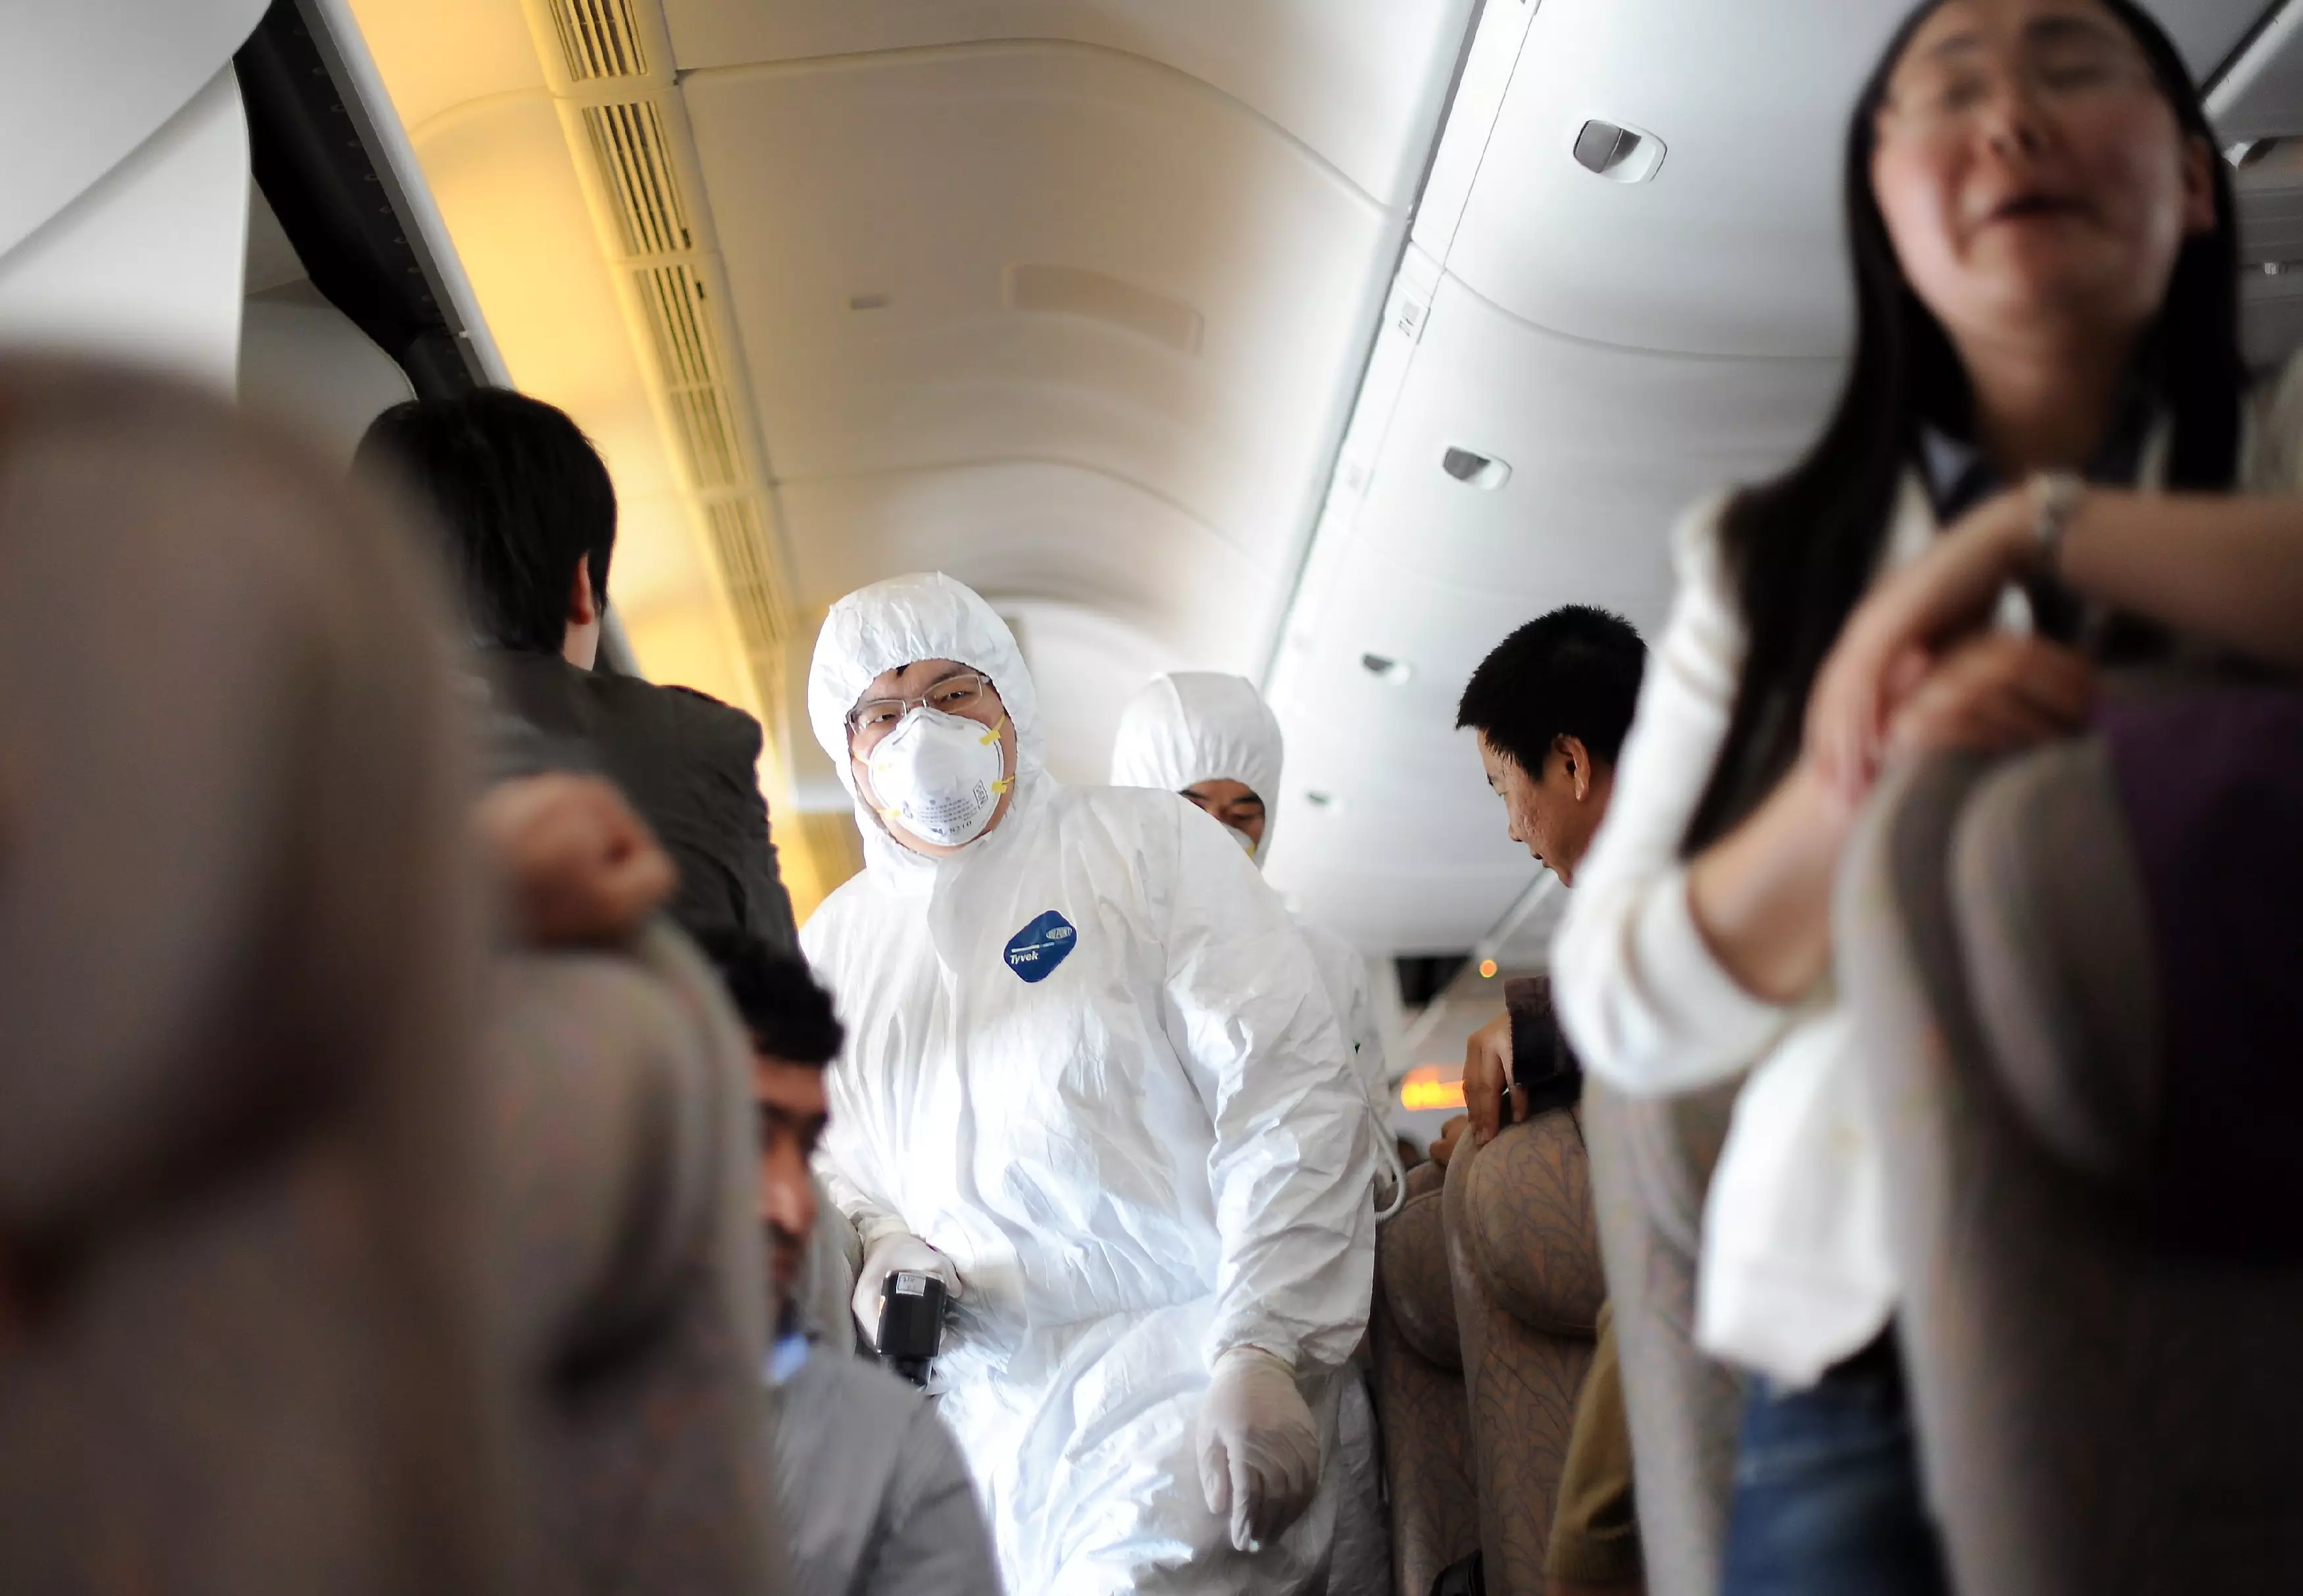 Health authorities checking a plane in 2009 amid the swine flu pandemic.